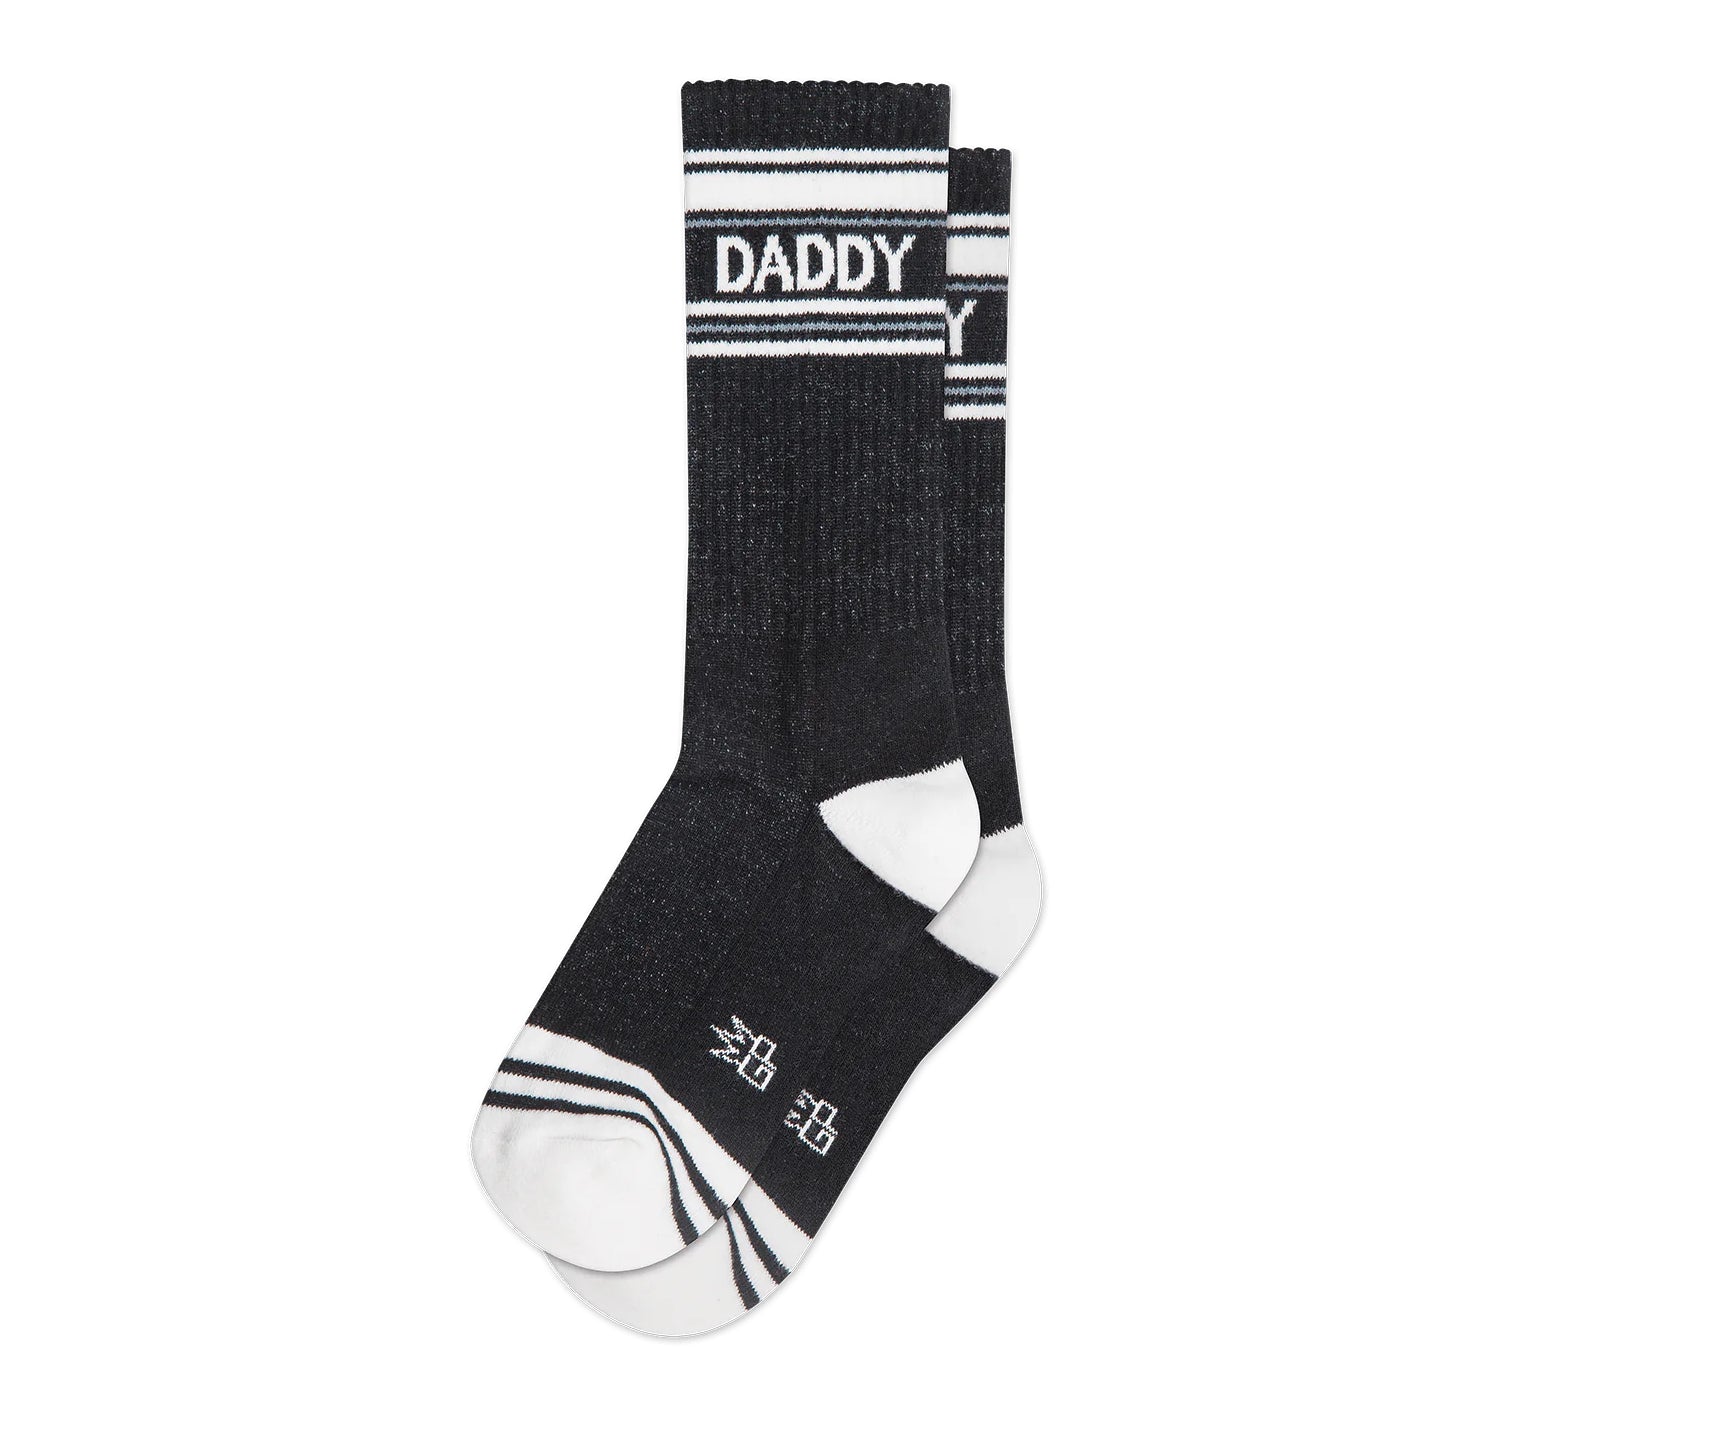 A pair of black and white crew socks that read "daddy" with the Gumball Poodle logo on the arch.